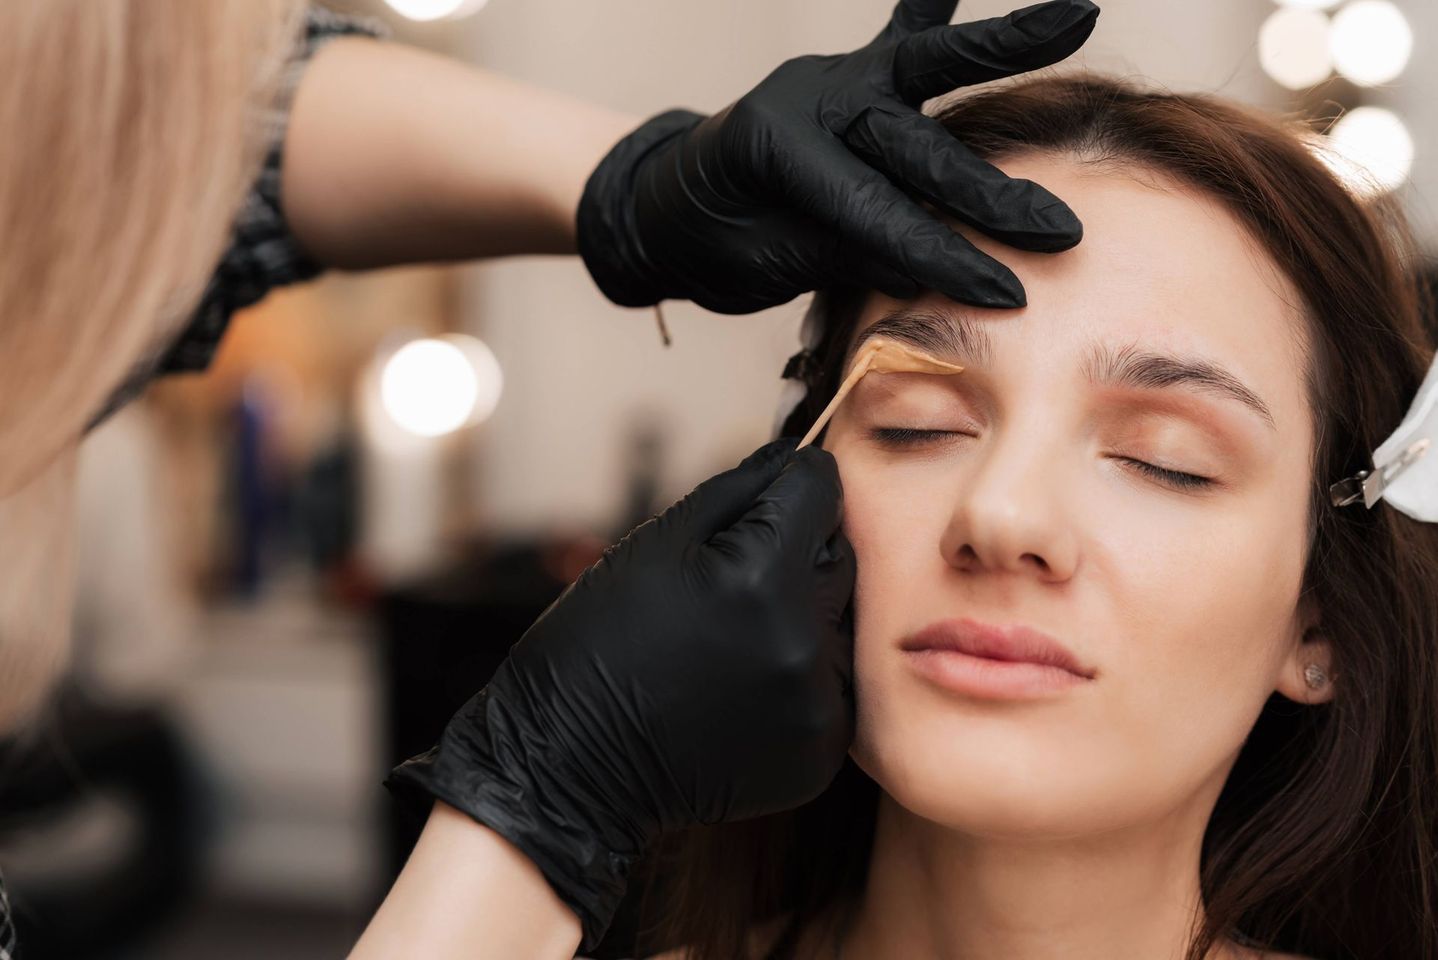 a woman is getting her eyebrows waxed by a woman wearing black gloves